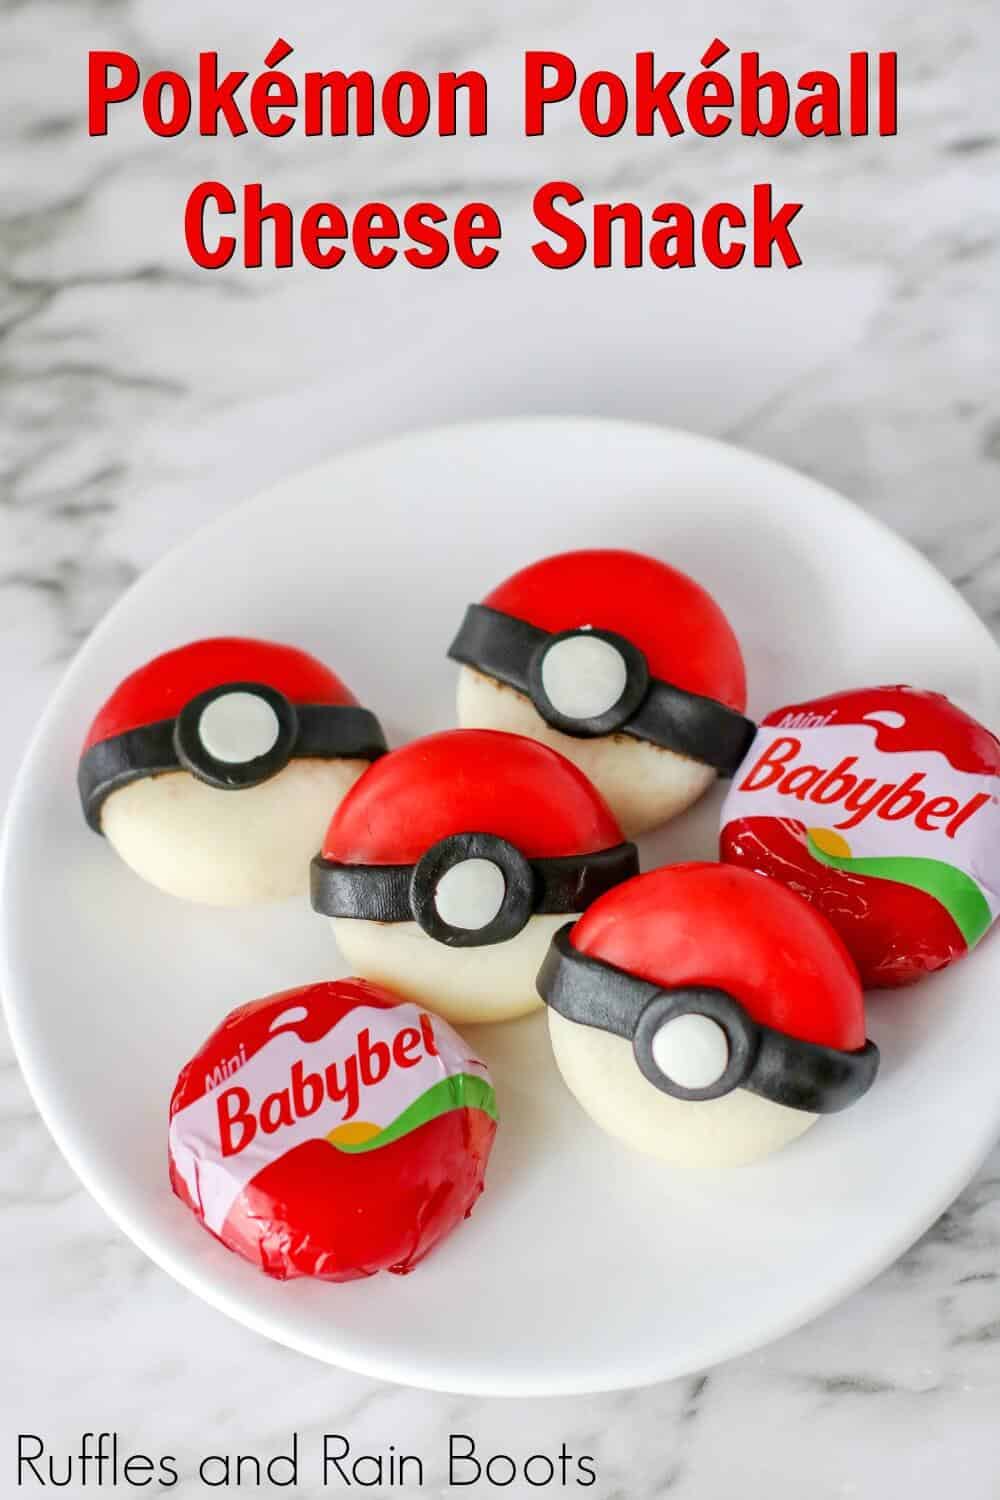 pokeball cheese snack on a plate with text which reads pokemon pokeball cheese snack